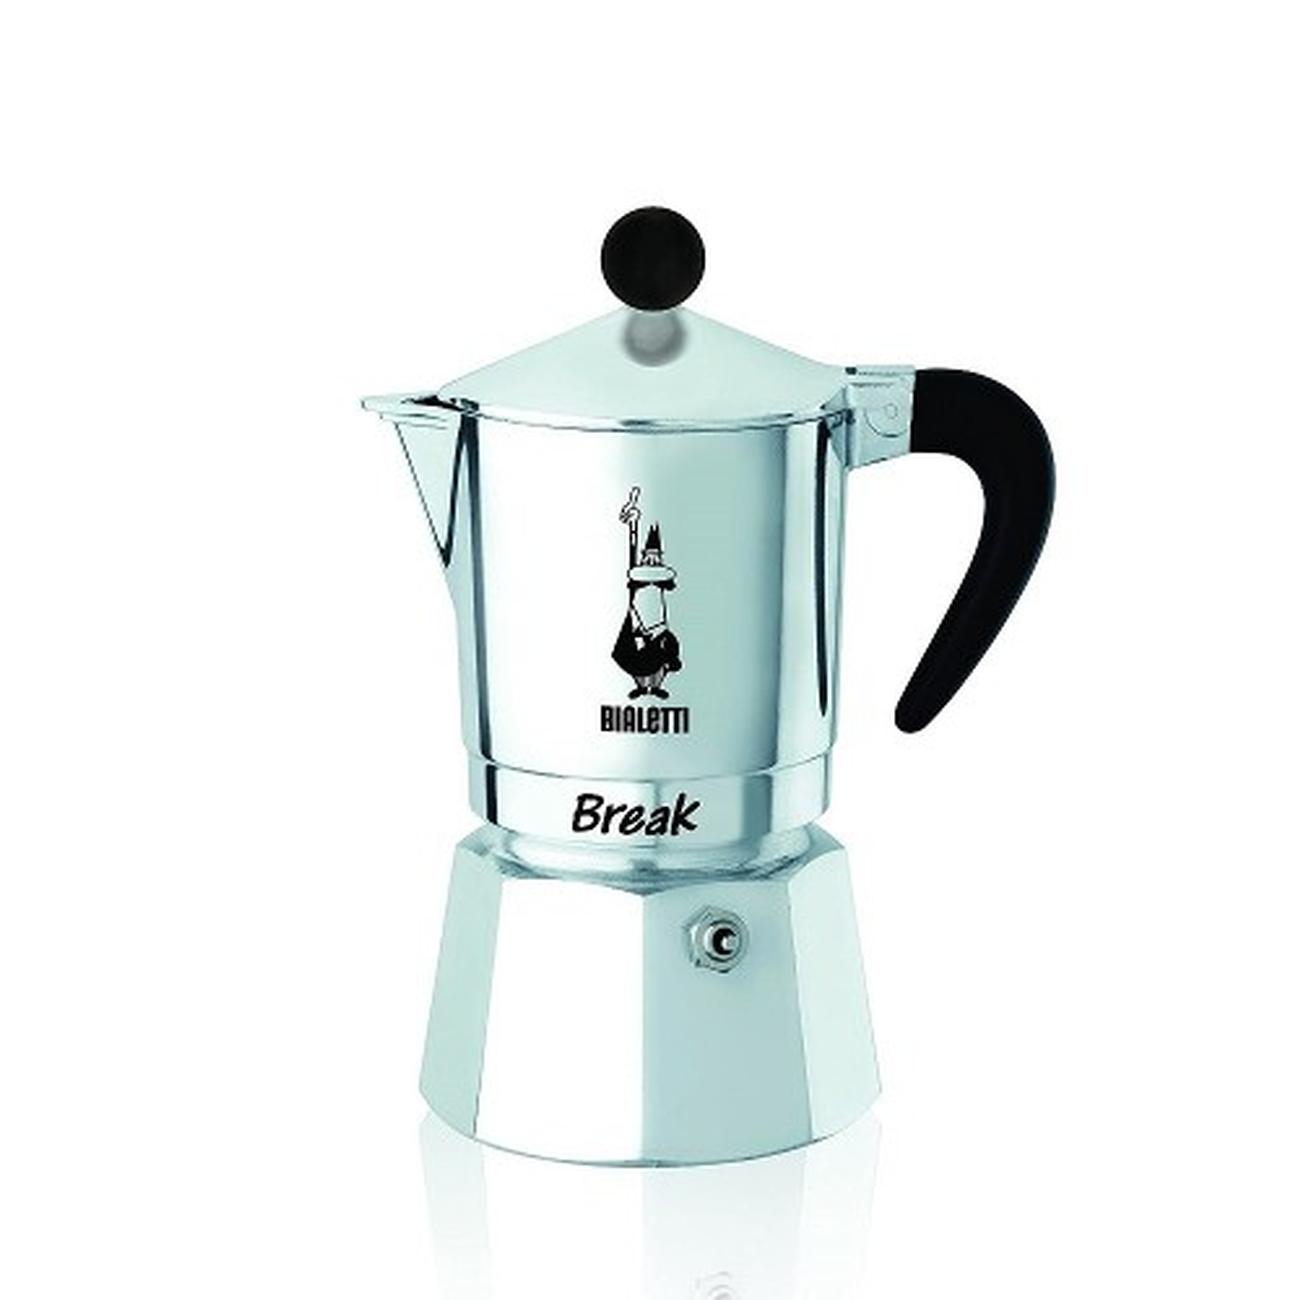 https://www.thekitchenwhisk.ie/contentFiles/productImages/Large/Bialetti-Break-3-Cup-Espresso-Maker.jpg